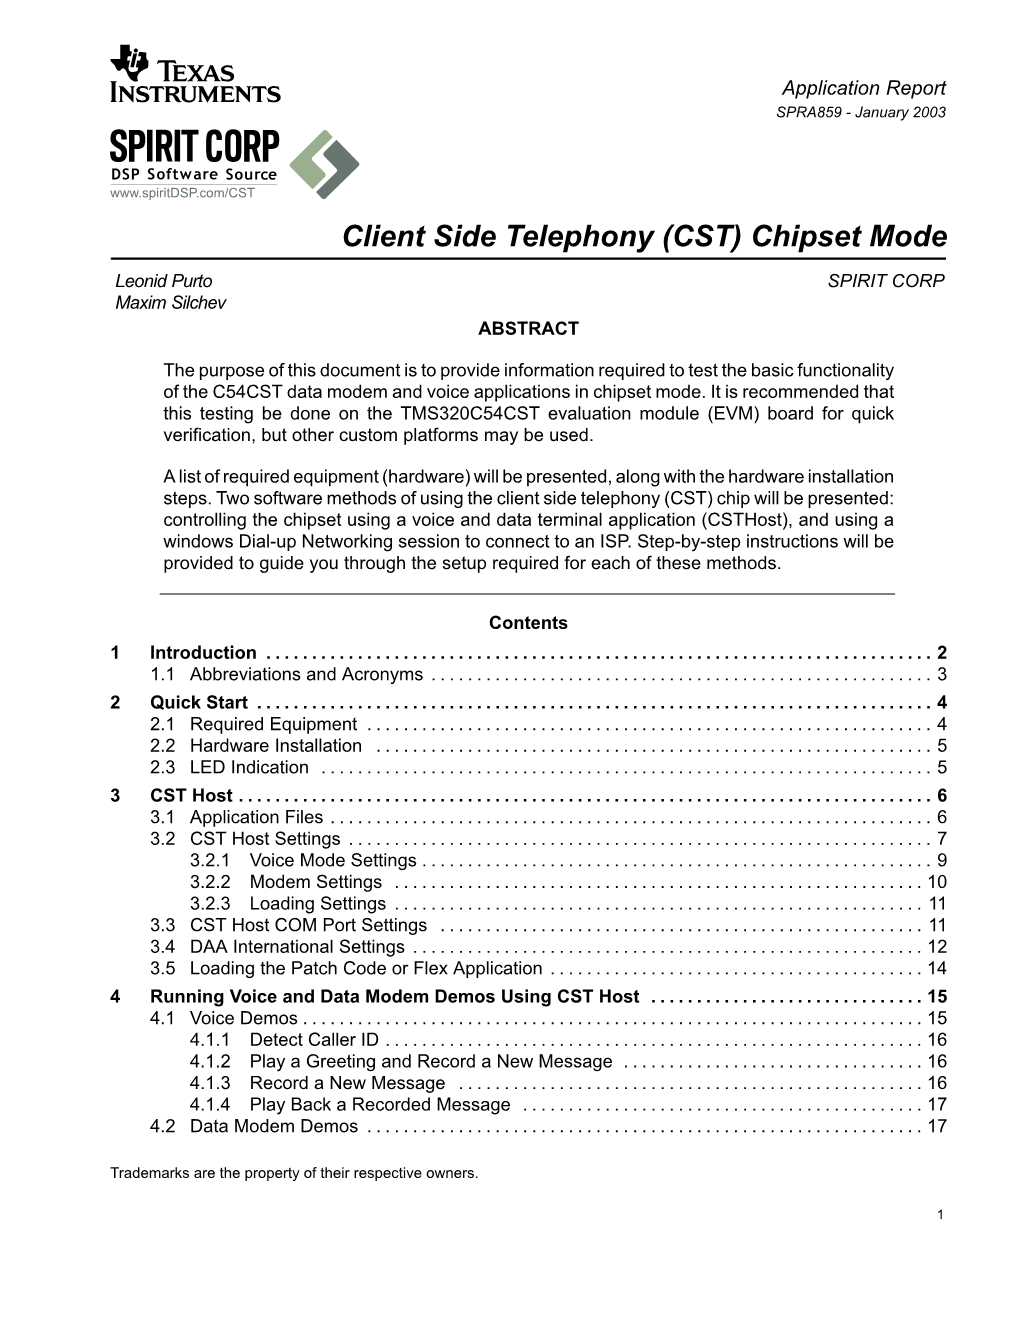 Client Side Telephony (CST) Chipset Mode